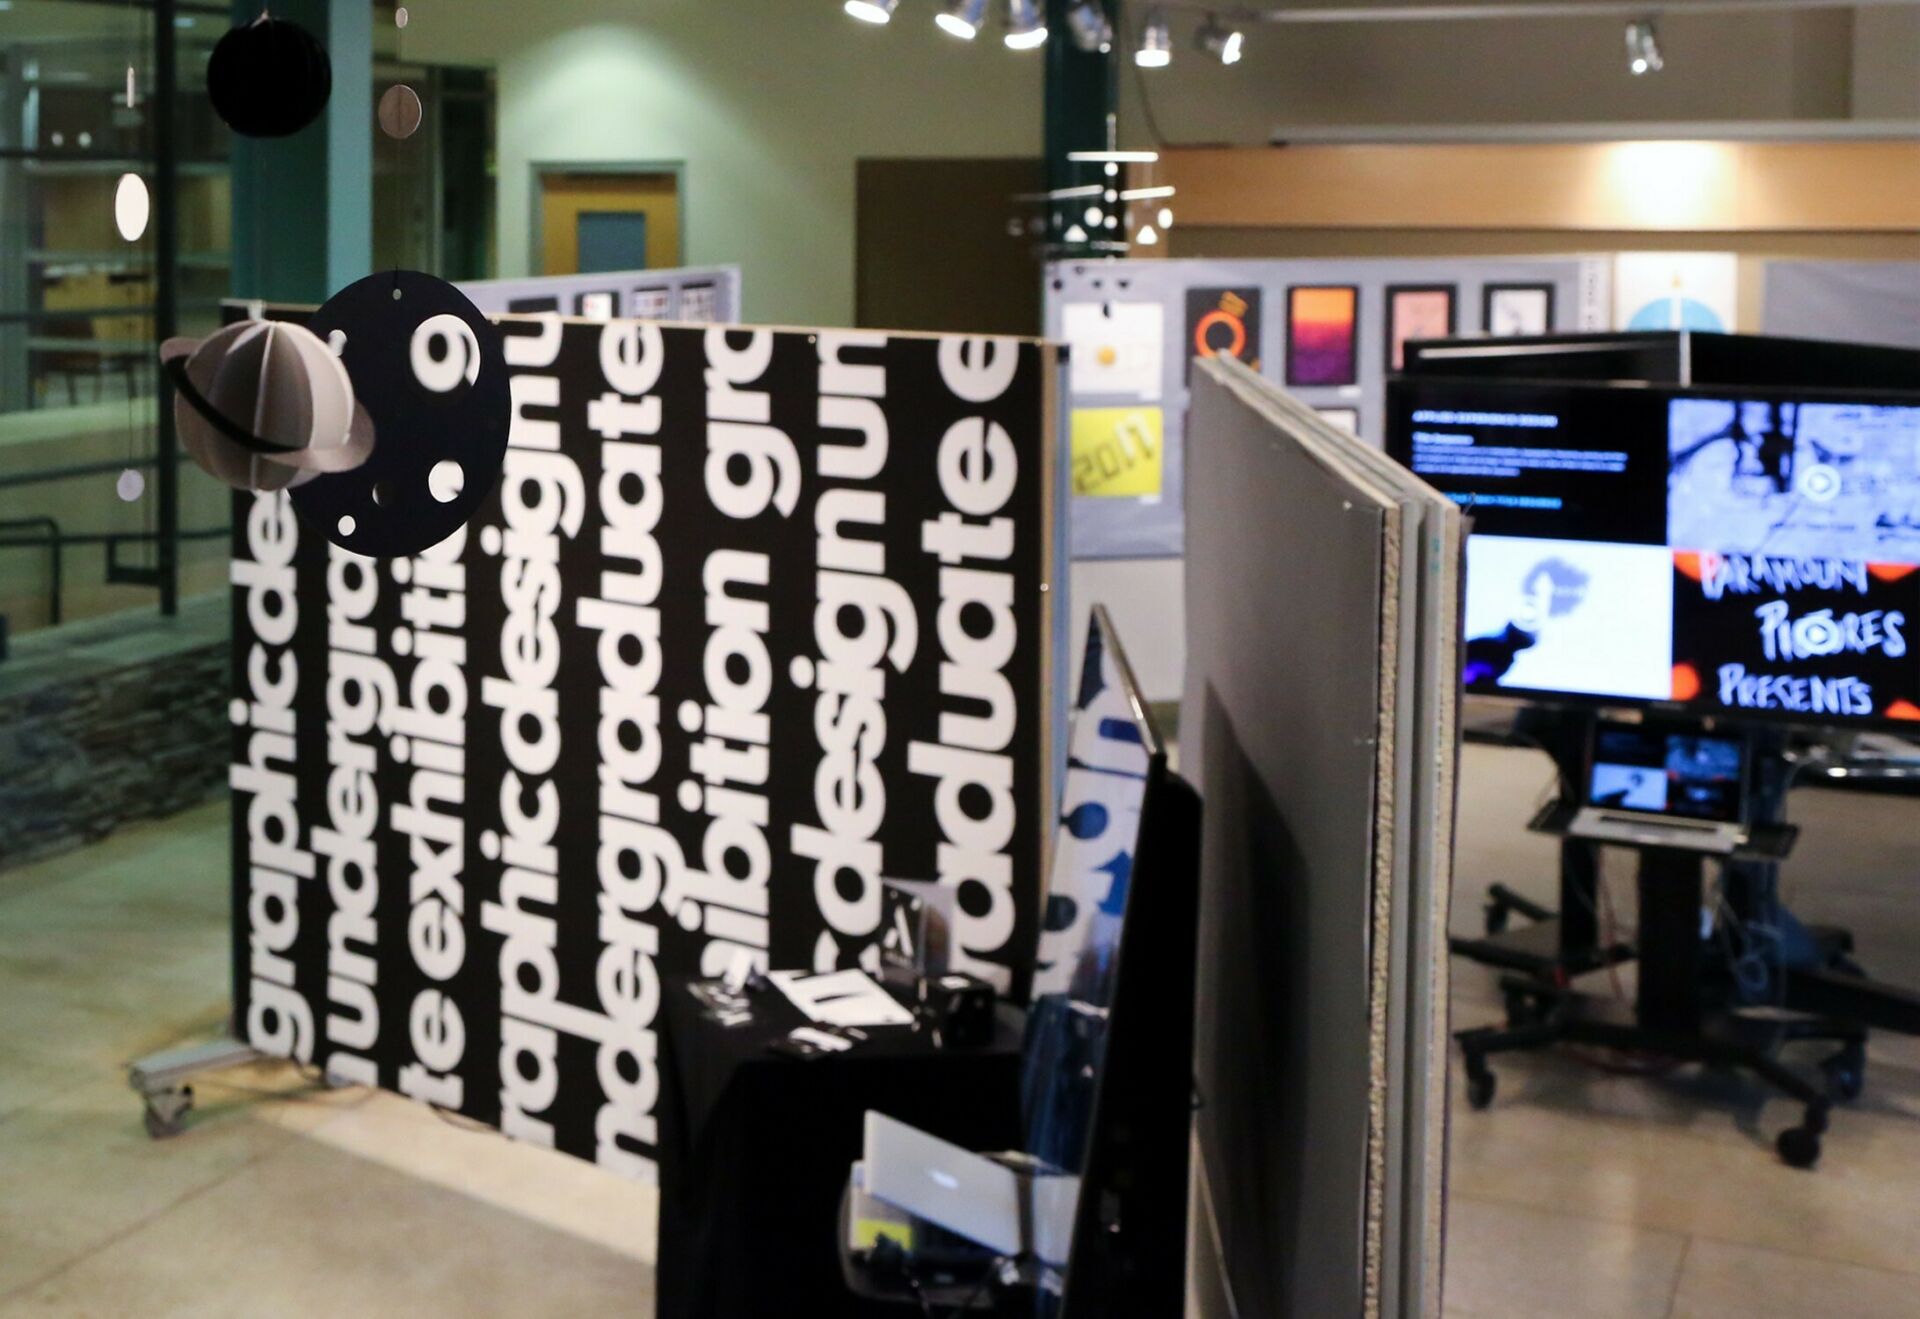 Undergraduate graphic design student work exhibition: showcasing a wall divider with big bold text, digital designs on flat-screen TVs, and poster design pinned up on a divider board.